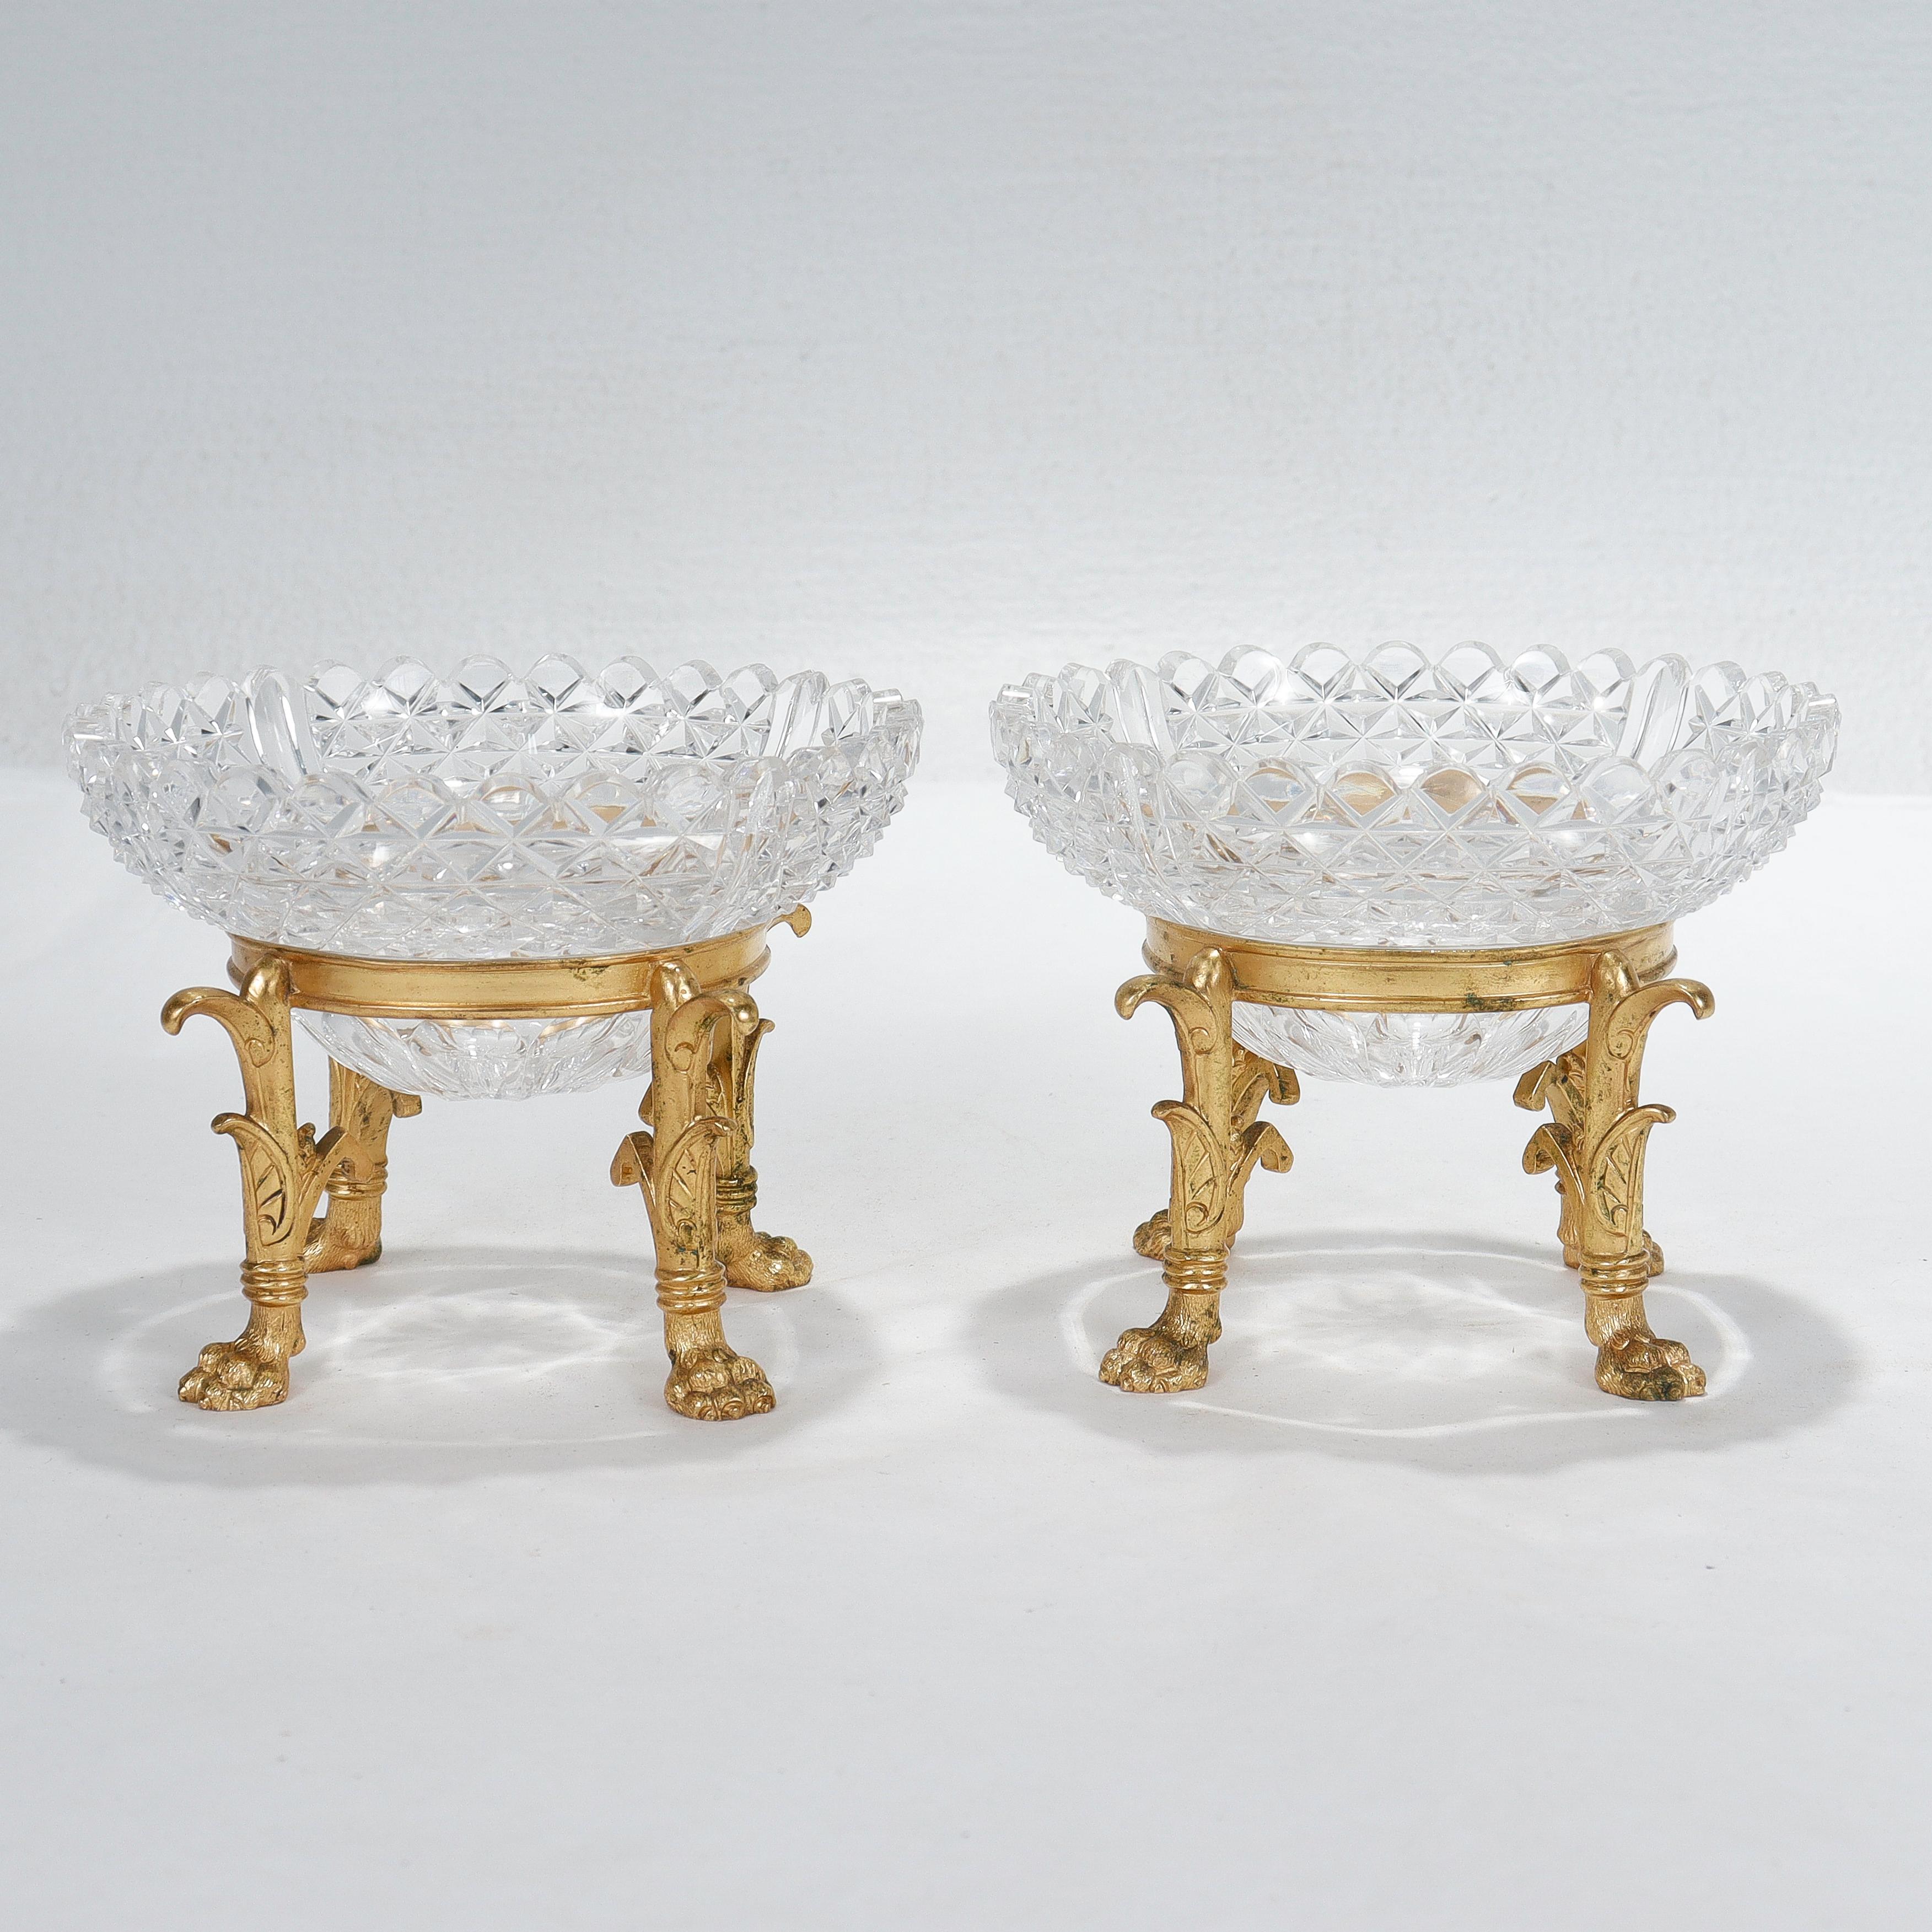 Pair of Gilt Bronze & Cut Glass Footed Bowls Attributed to F. & C. Osler 1